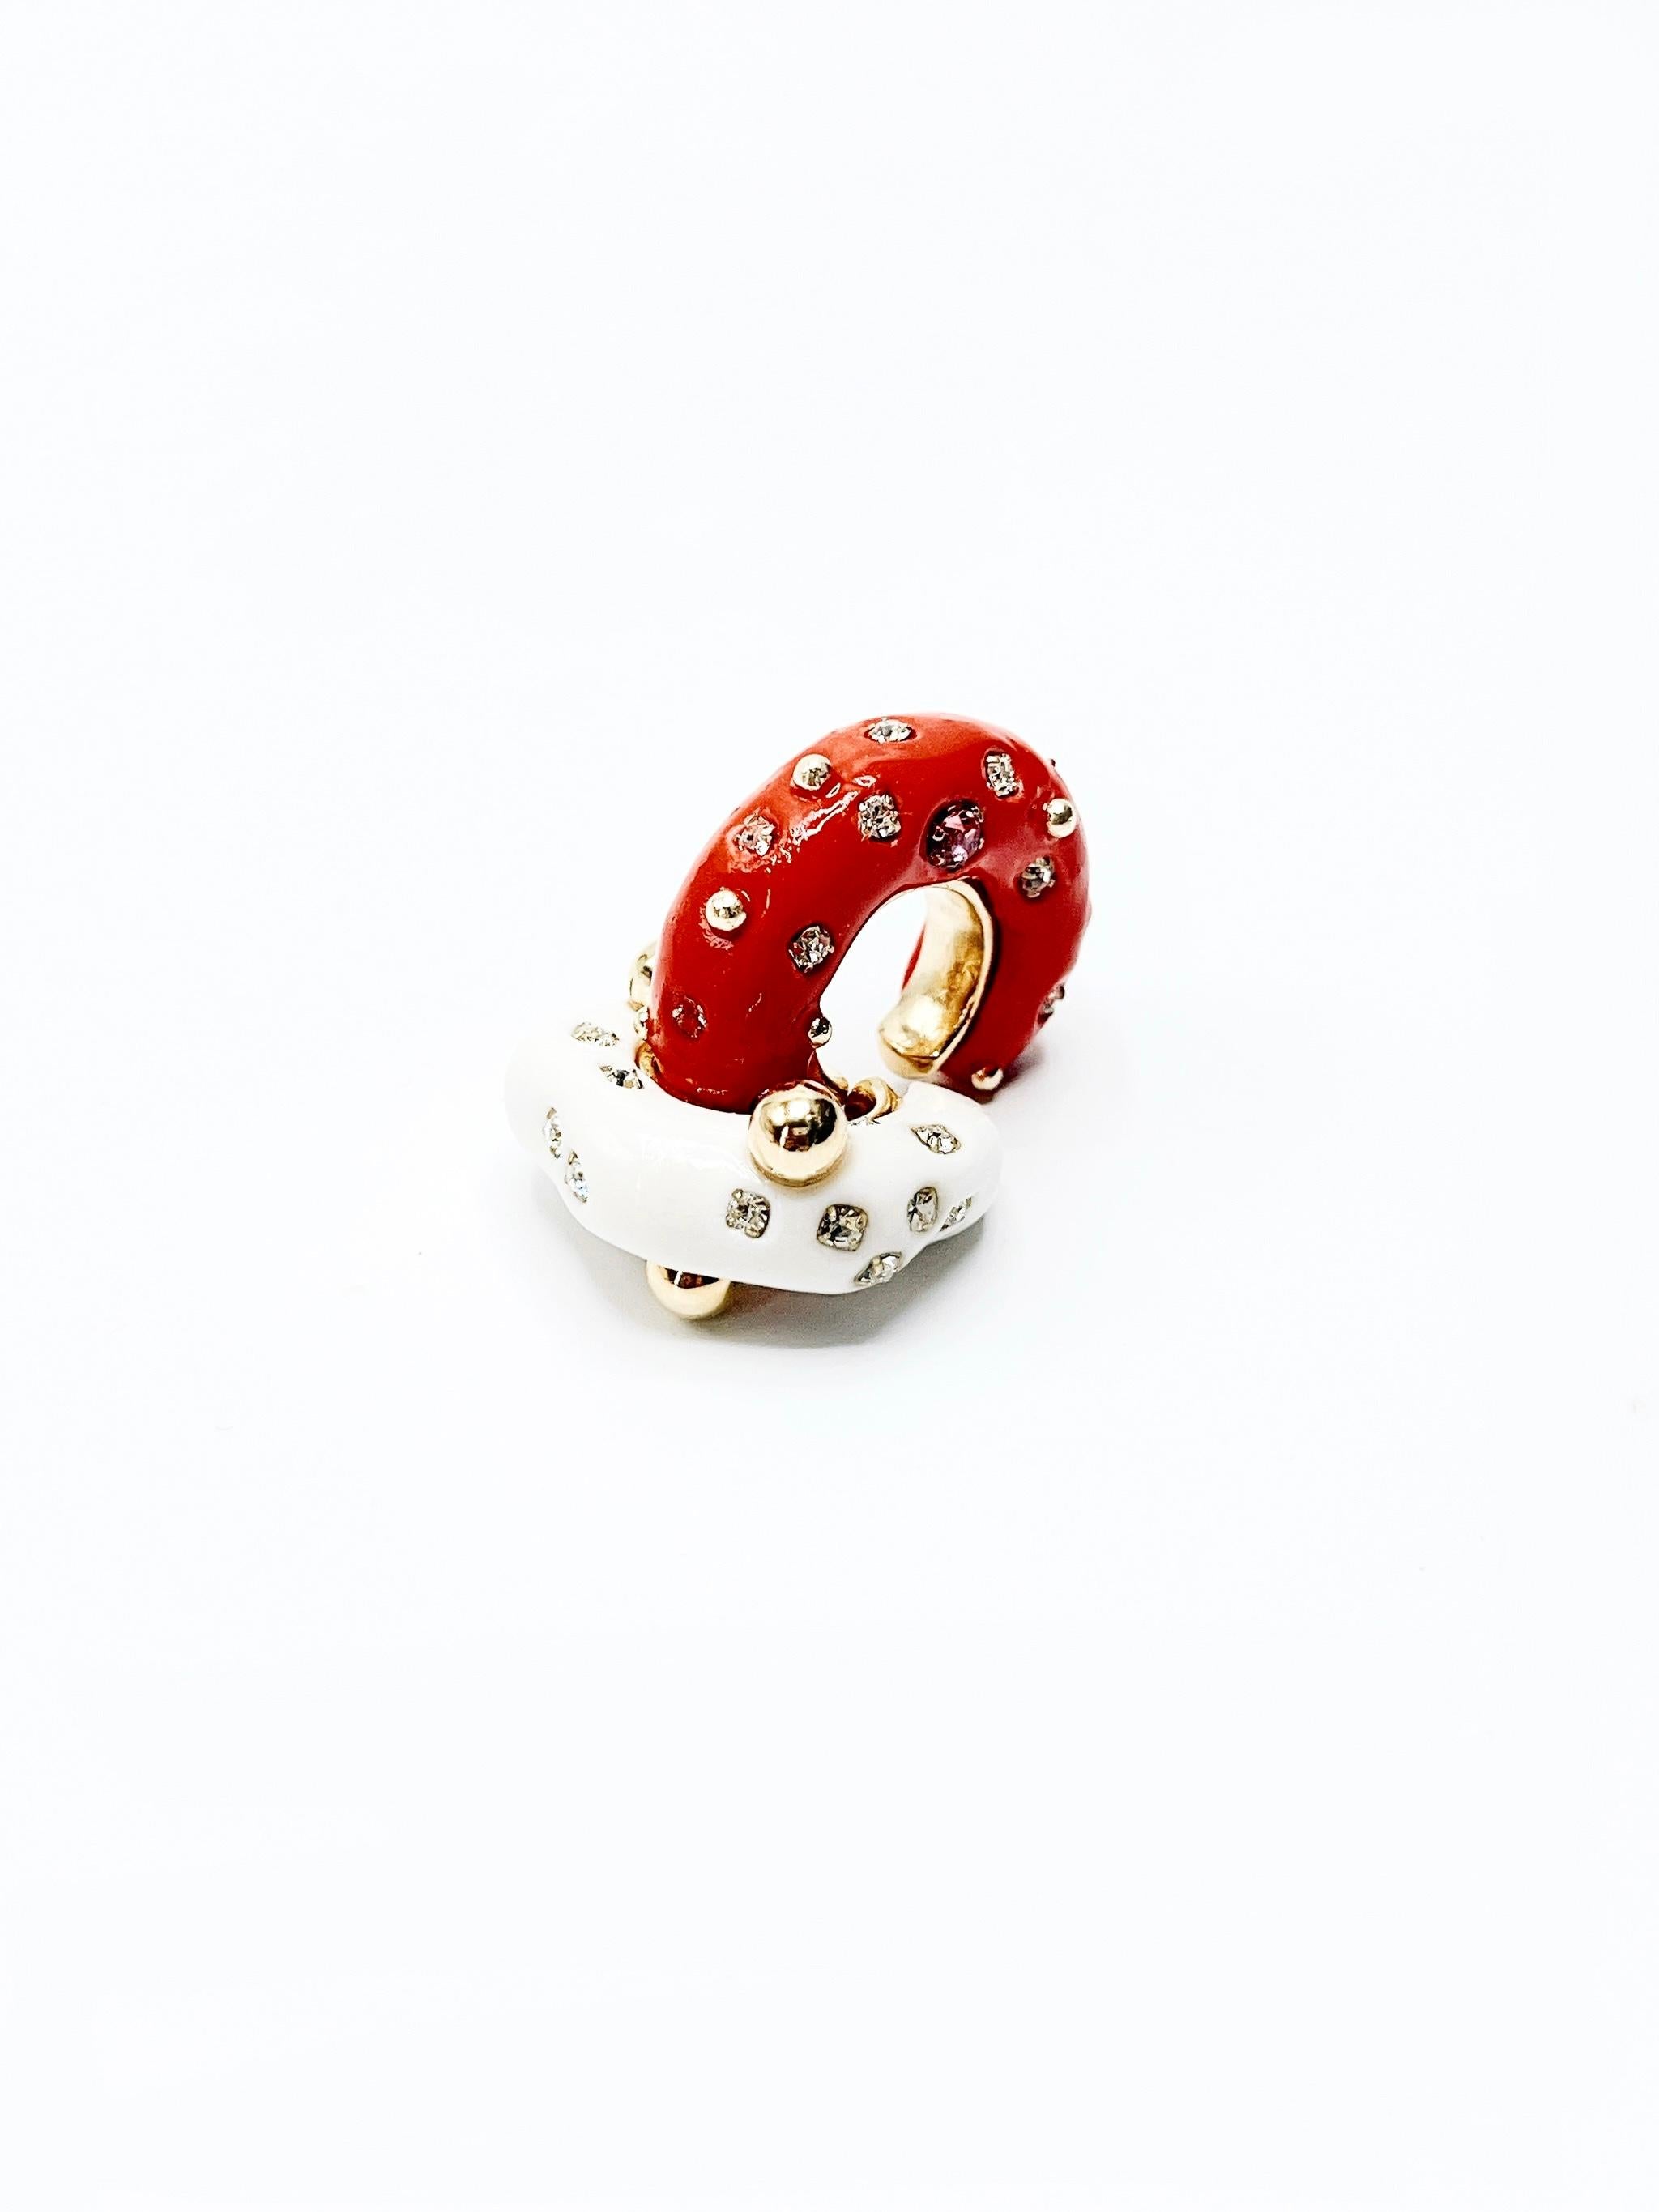 TEARDROPS in a Diary, No. 4_In Red_Hand crafted Ear cuff In New Condition For Sale In Brooklyn, NY